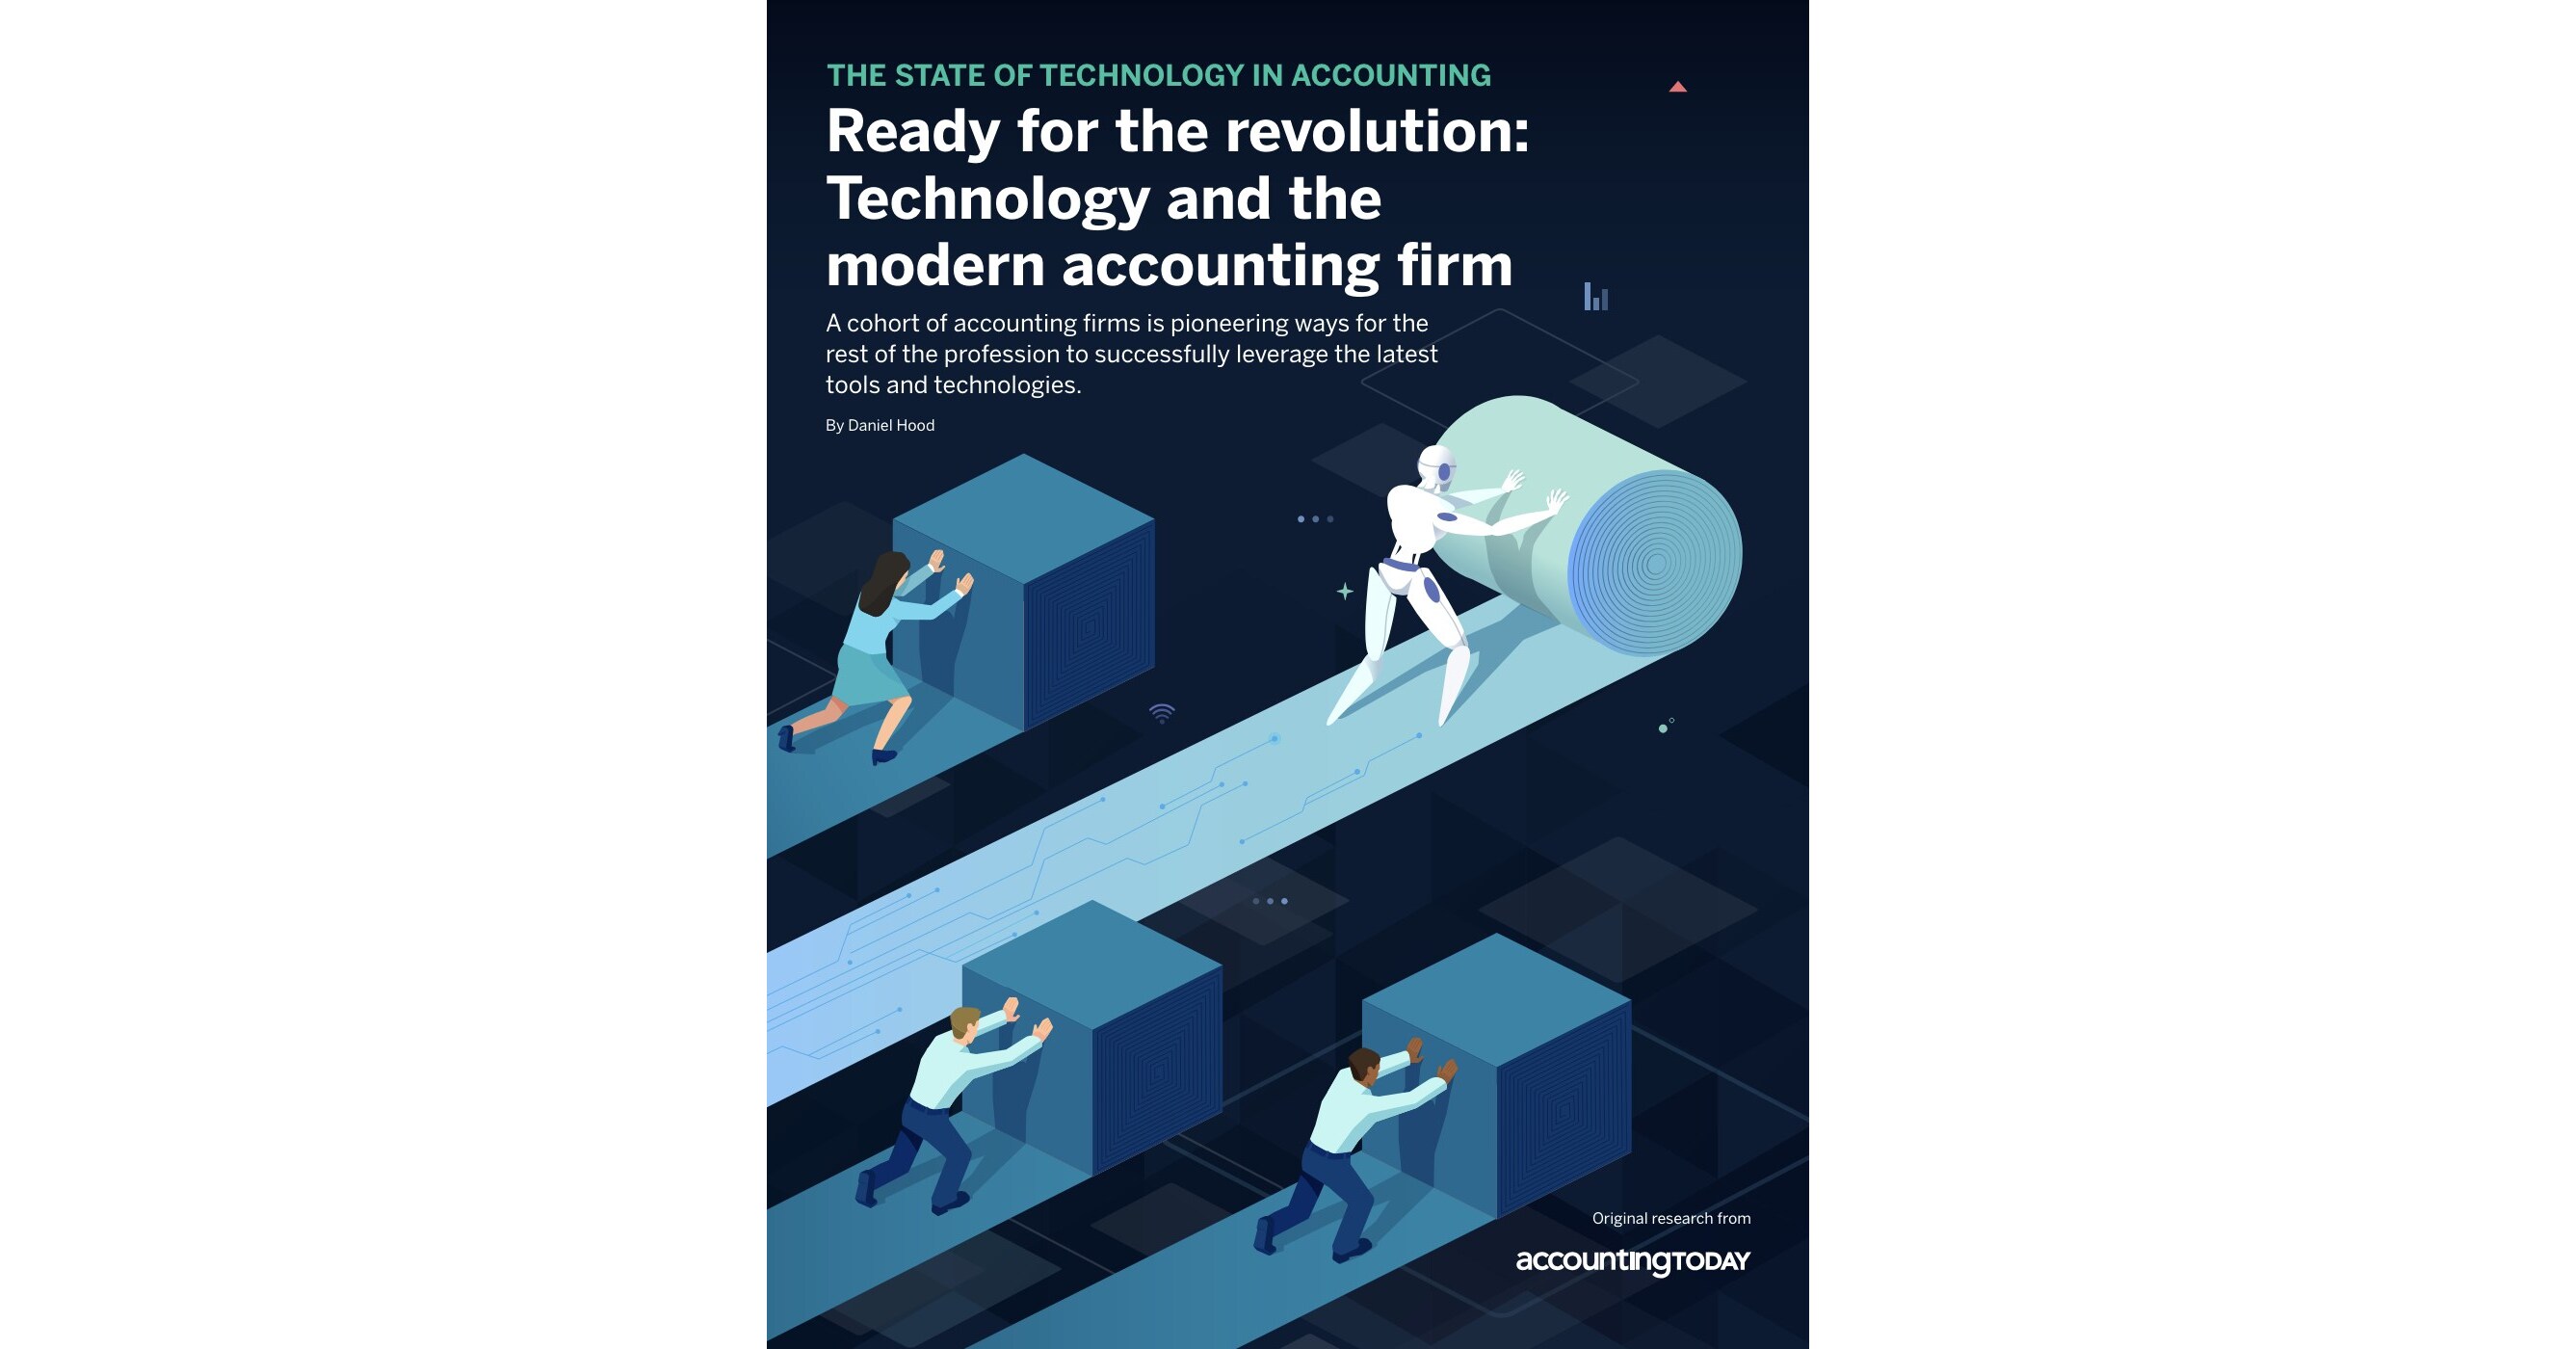 Accounting Today publishes The State of Technology in Accounting report, analyzing the technological revolution, the different stages of adoption and risks and benefits